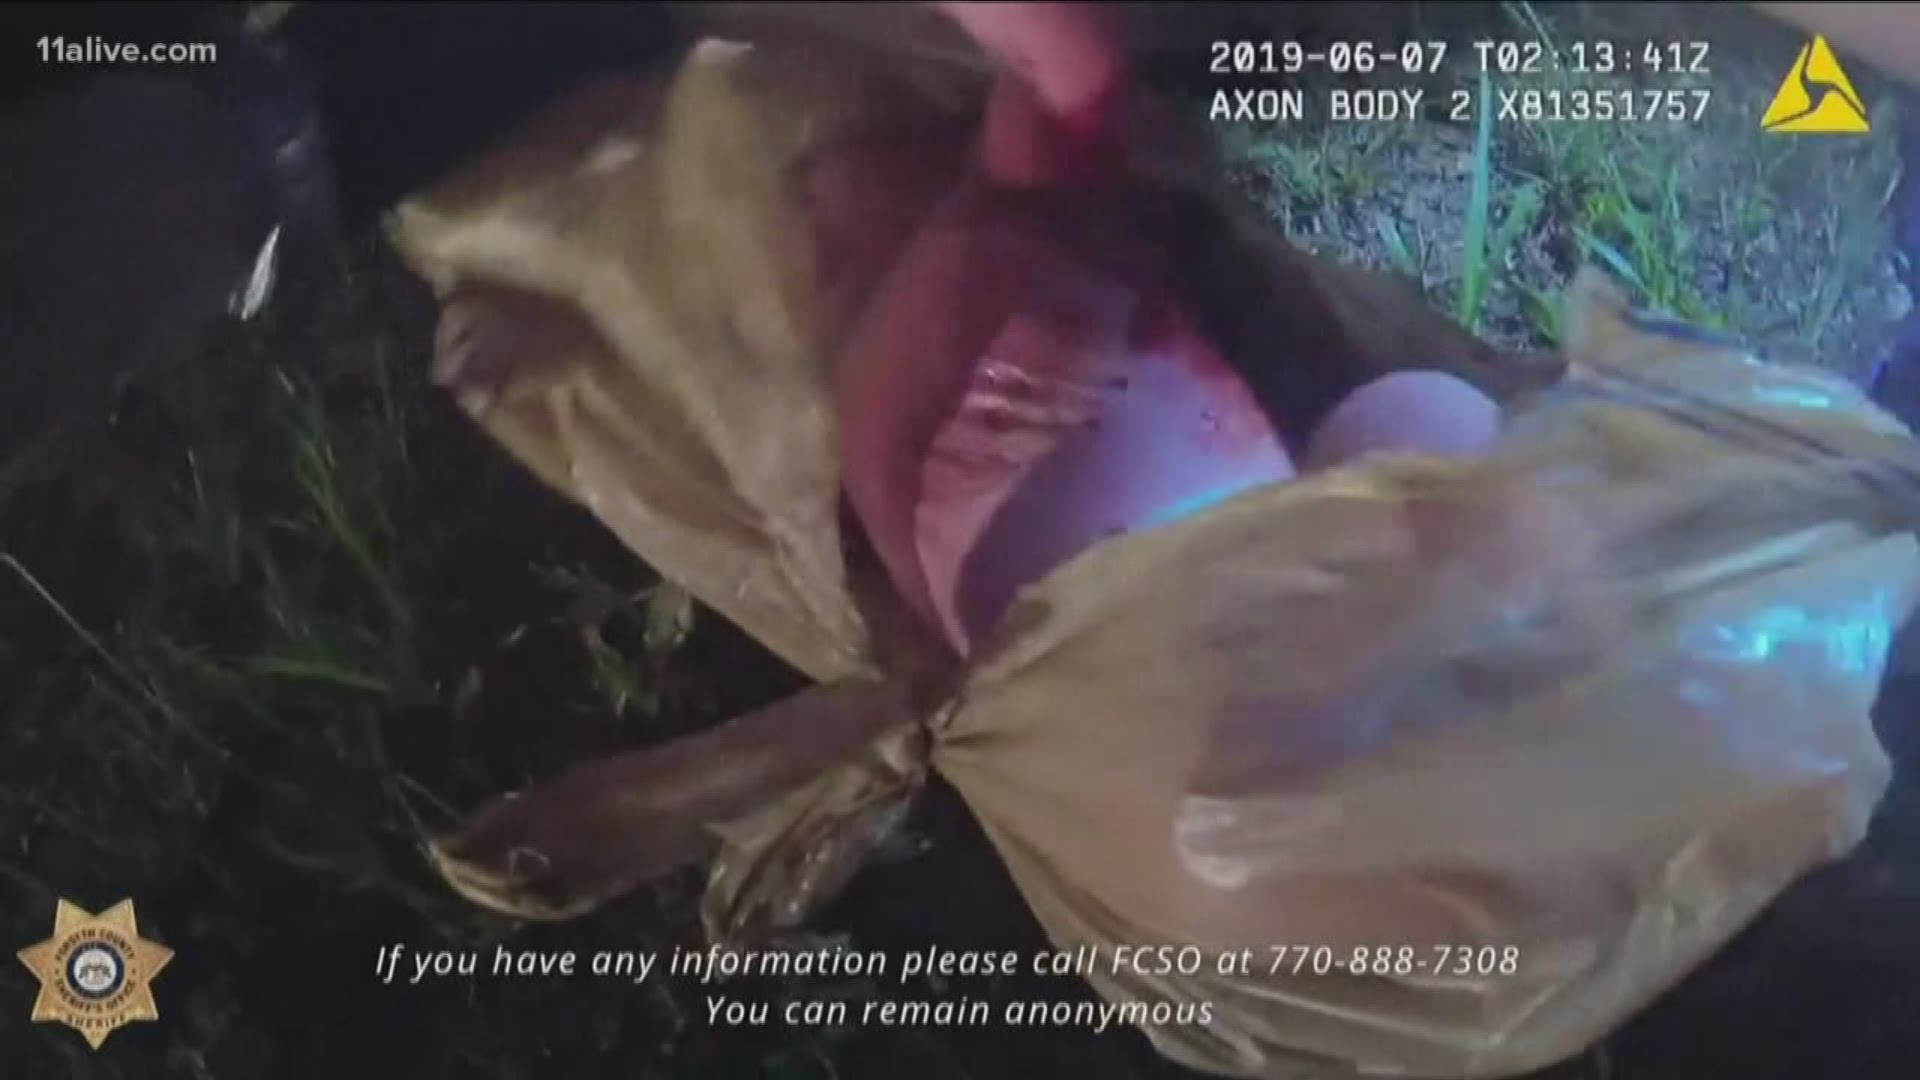 The body cam video shows the moments the baby was found wrapped in the plastic bag.